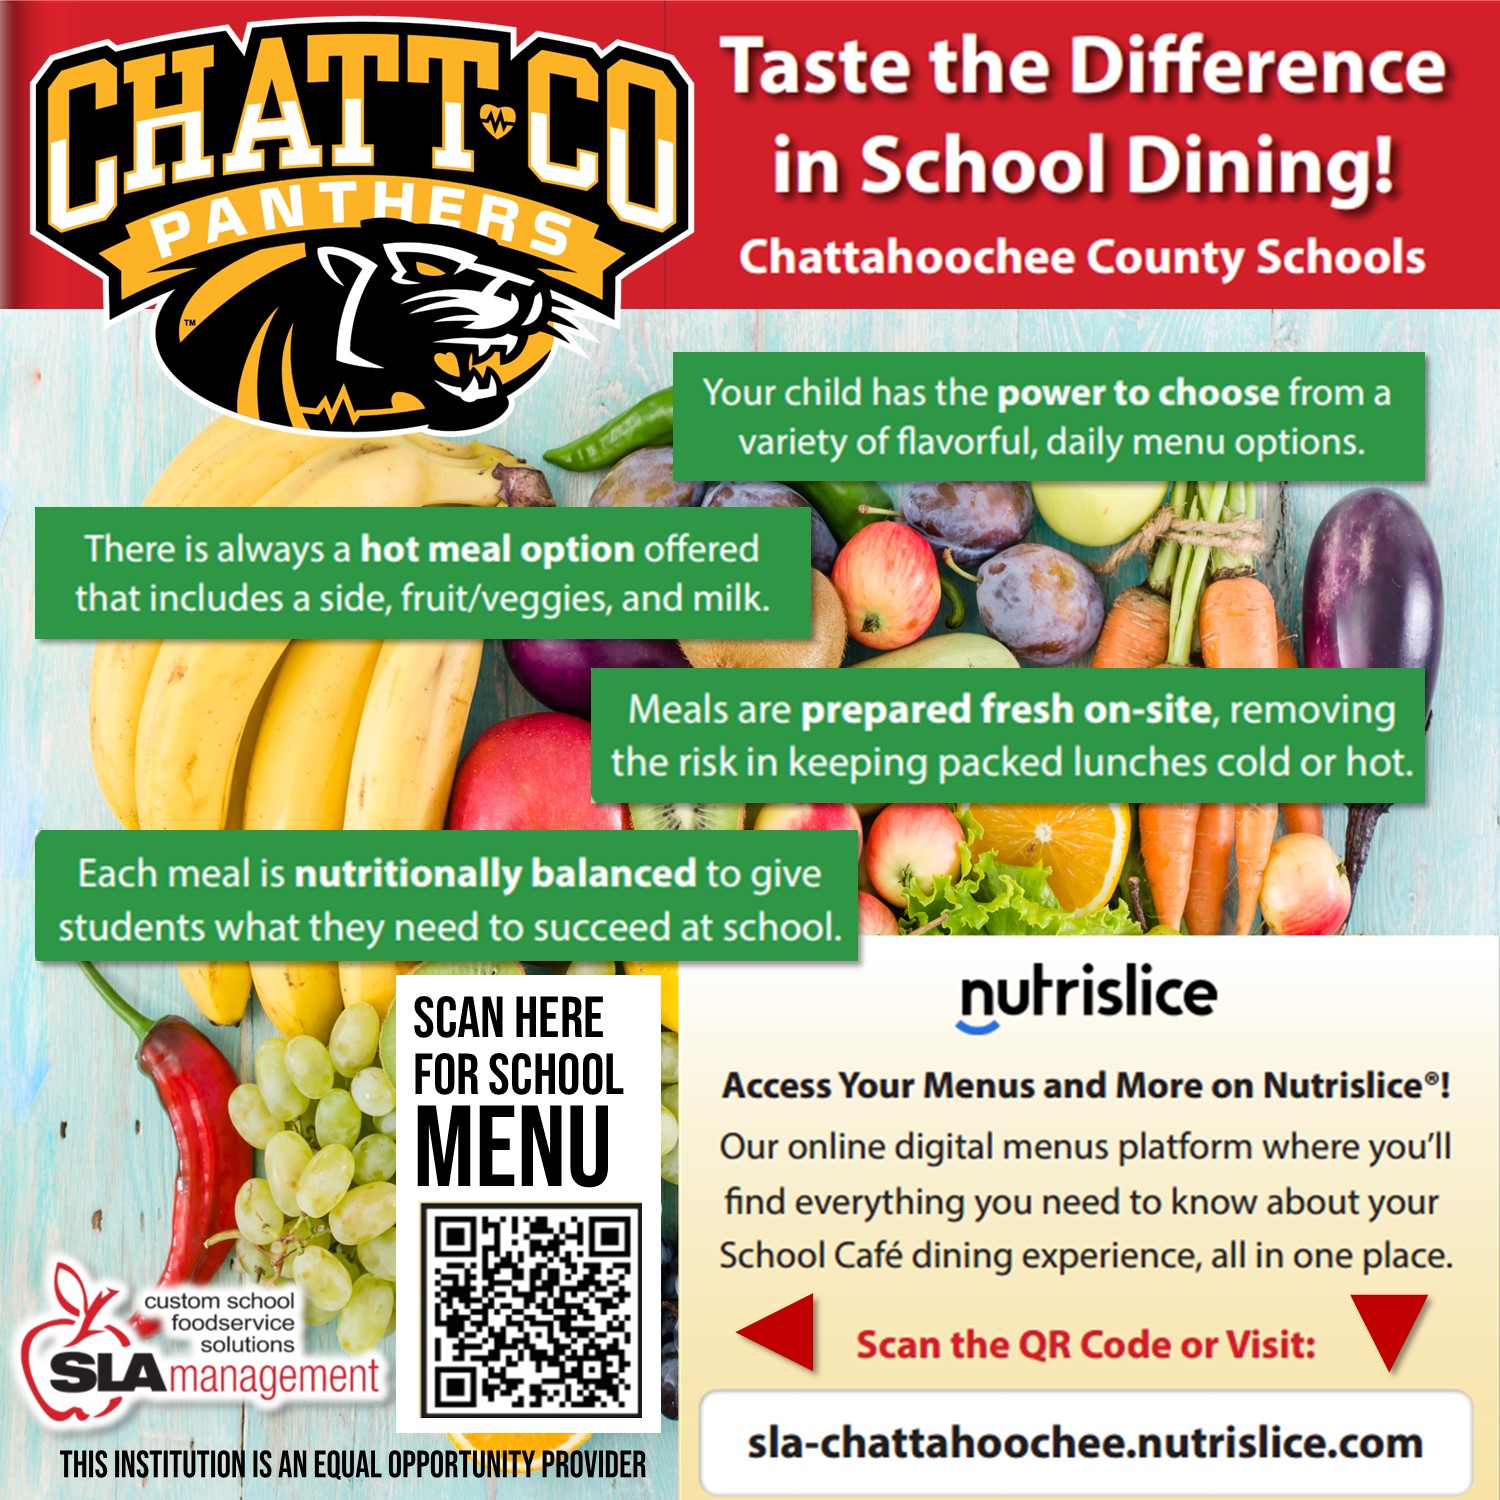 Taste the Difference in School Dining! Chattahoochee County Schools. Your child has the power to choose from a variety of flavorful, daily menu options. There is always a hot meal option offered that includes a side, fruit/veggies, and milk. Meals are prepared fresh on-site, removing the risk in keeping packed lunches cold or hot. Each meal is nutritionally balanced to give students what they need to succeed at schoo. Nutrislice. Access your menus and more on Nutrislice! Our online digital menus platform where you’ll find everything you need to know about your school café dining experience, all in one place. Sla-Chattahoochee.nutrislice.com  This institution is an equal opportunity provider.